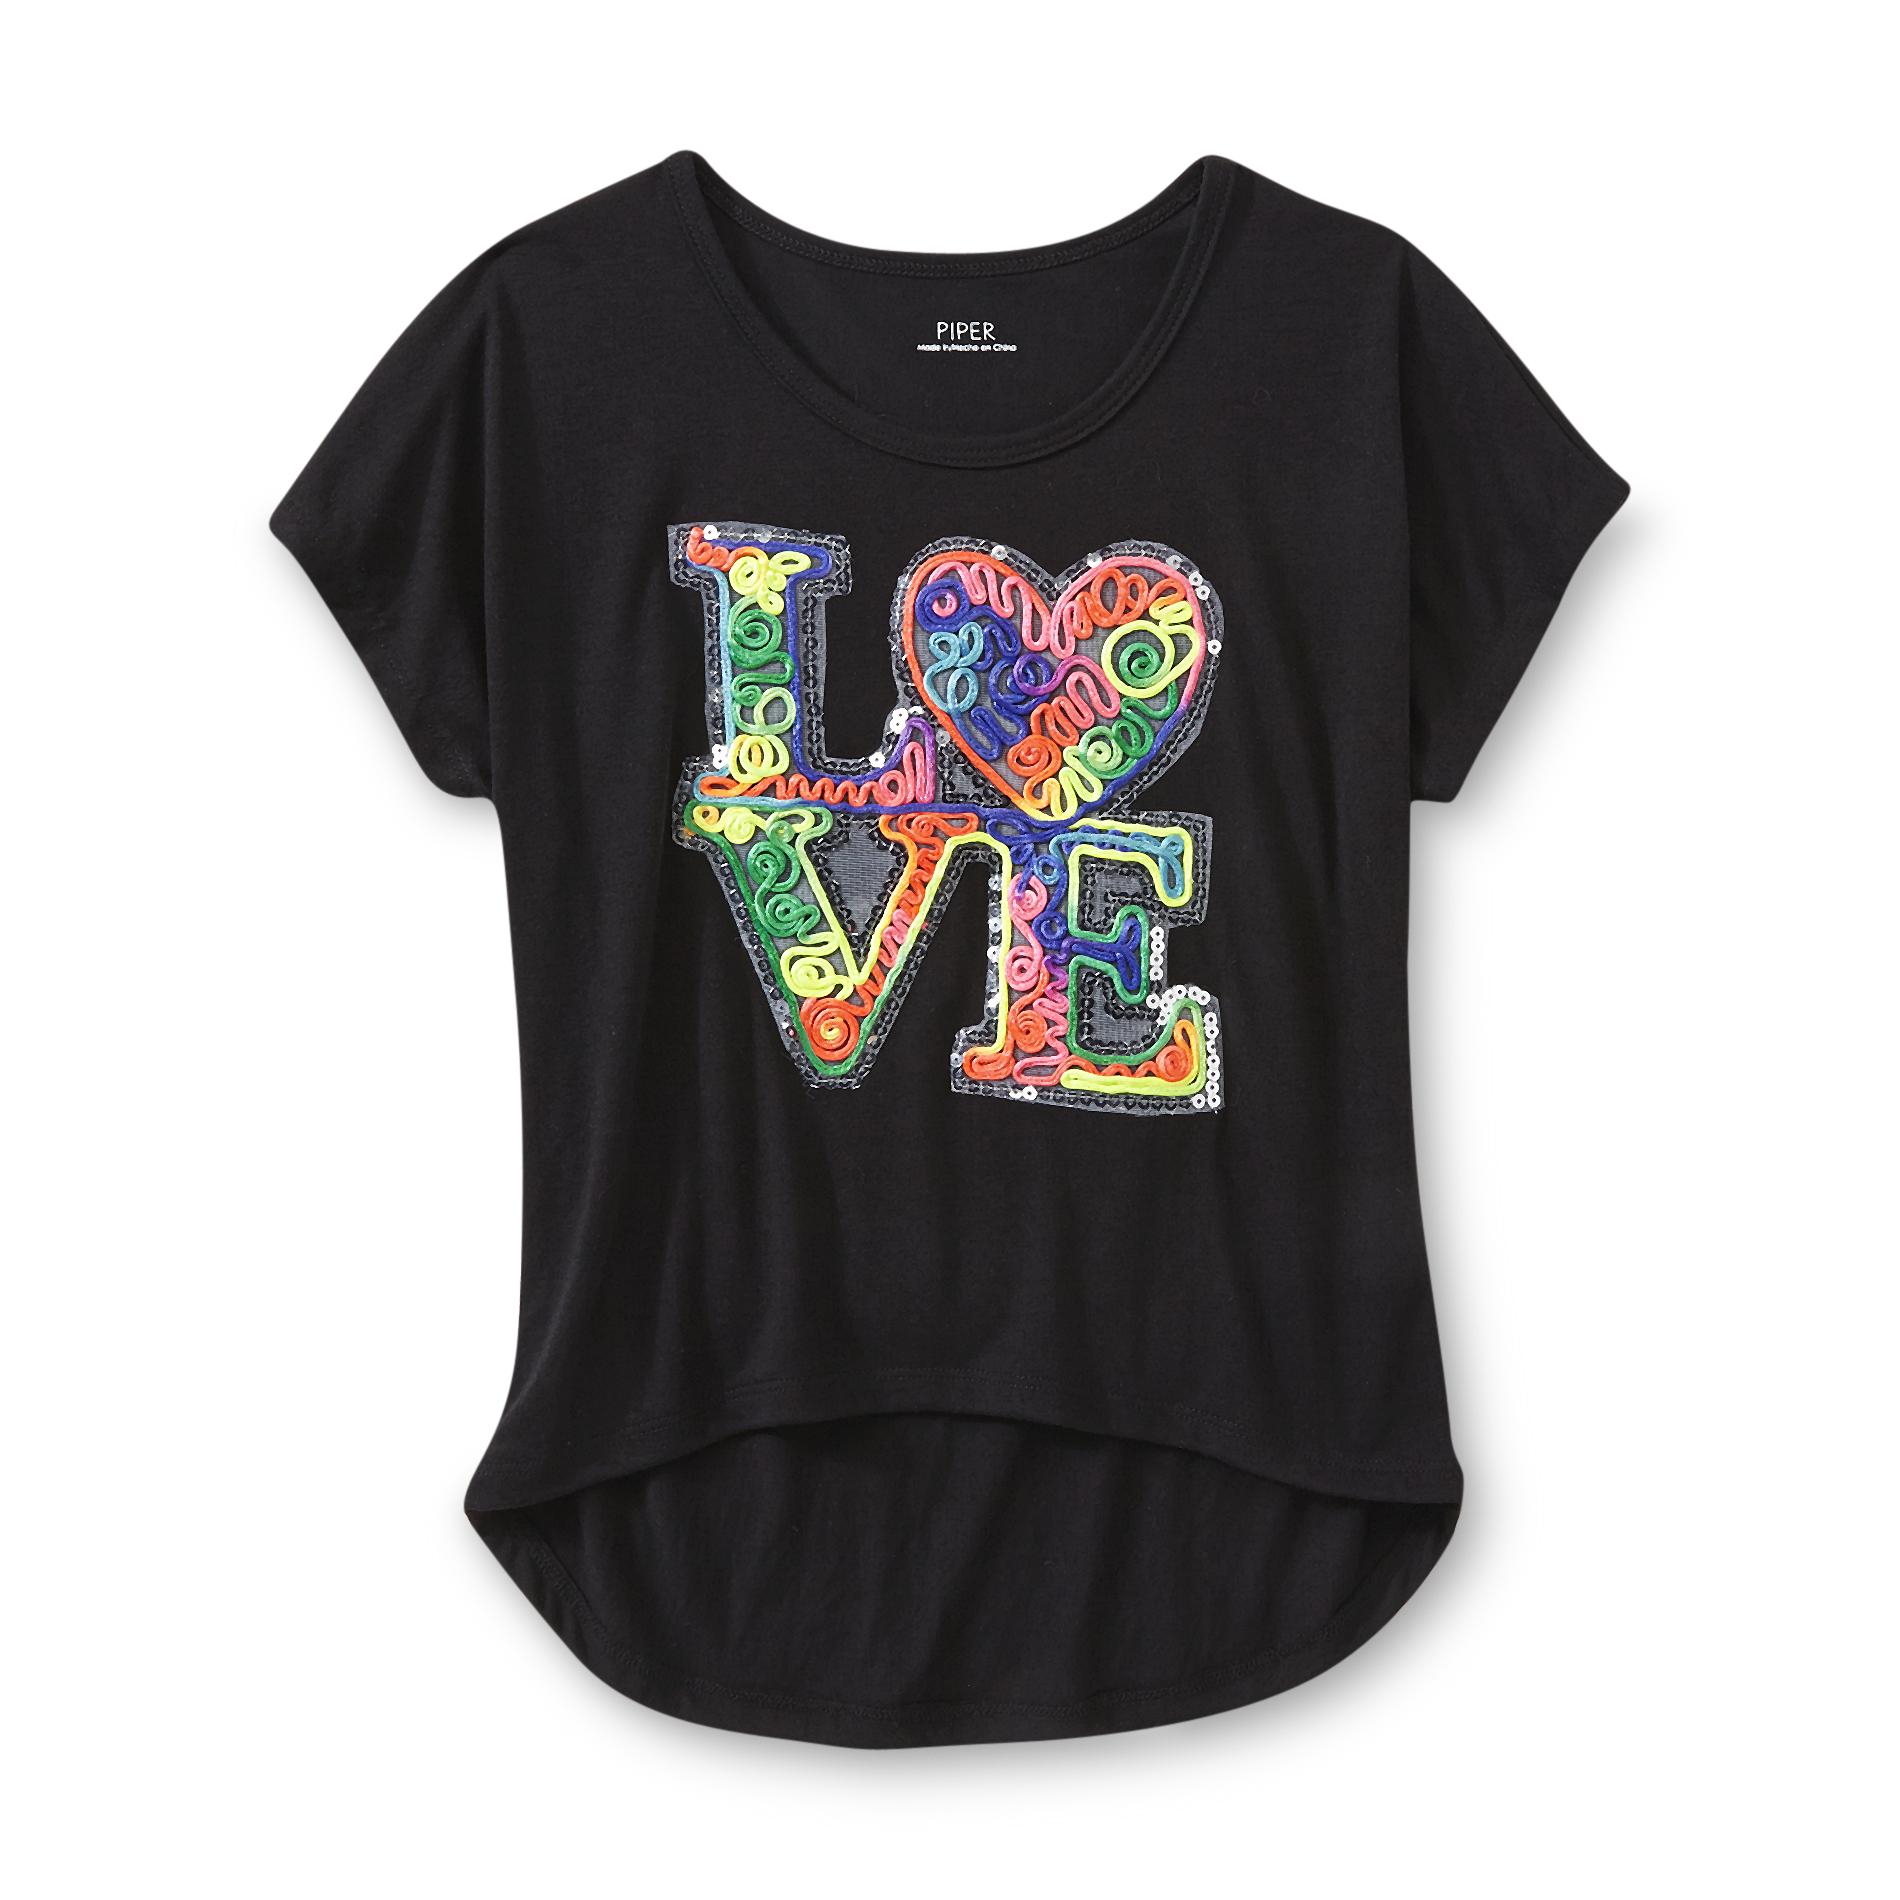 Piper Girl's Embellished Graphic T-Shirt - Heart